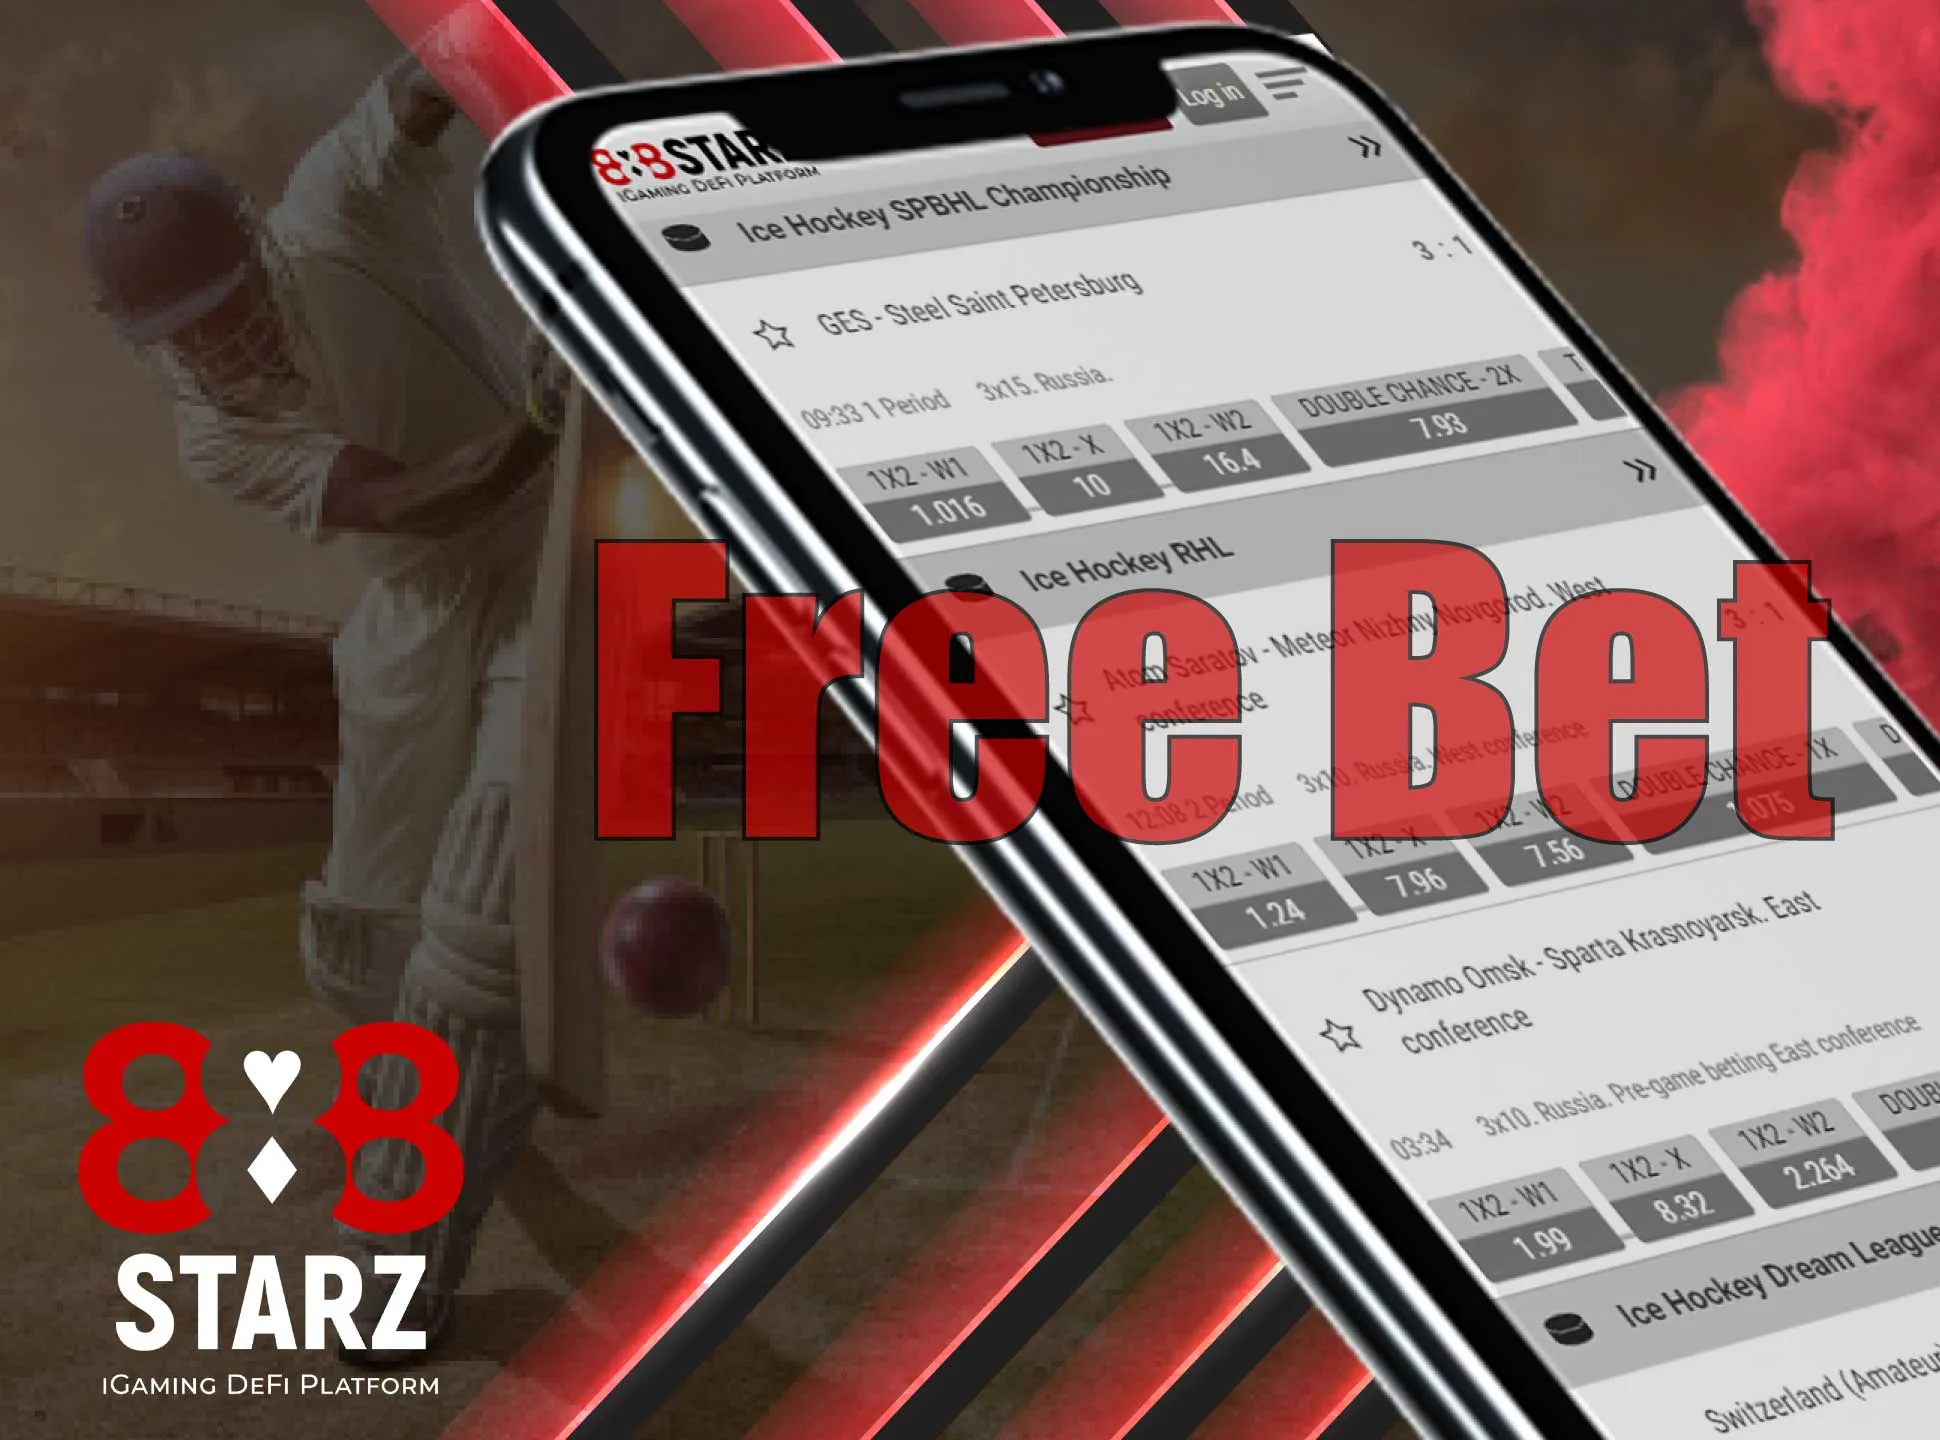 Get a free bet as a bonus on betting.